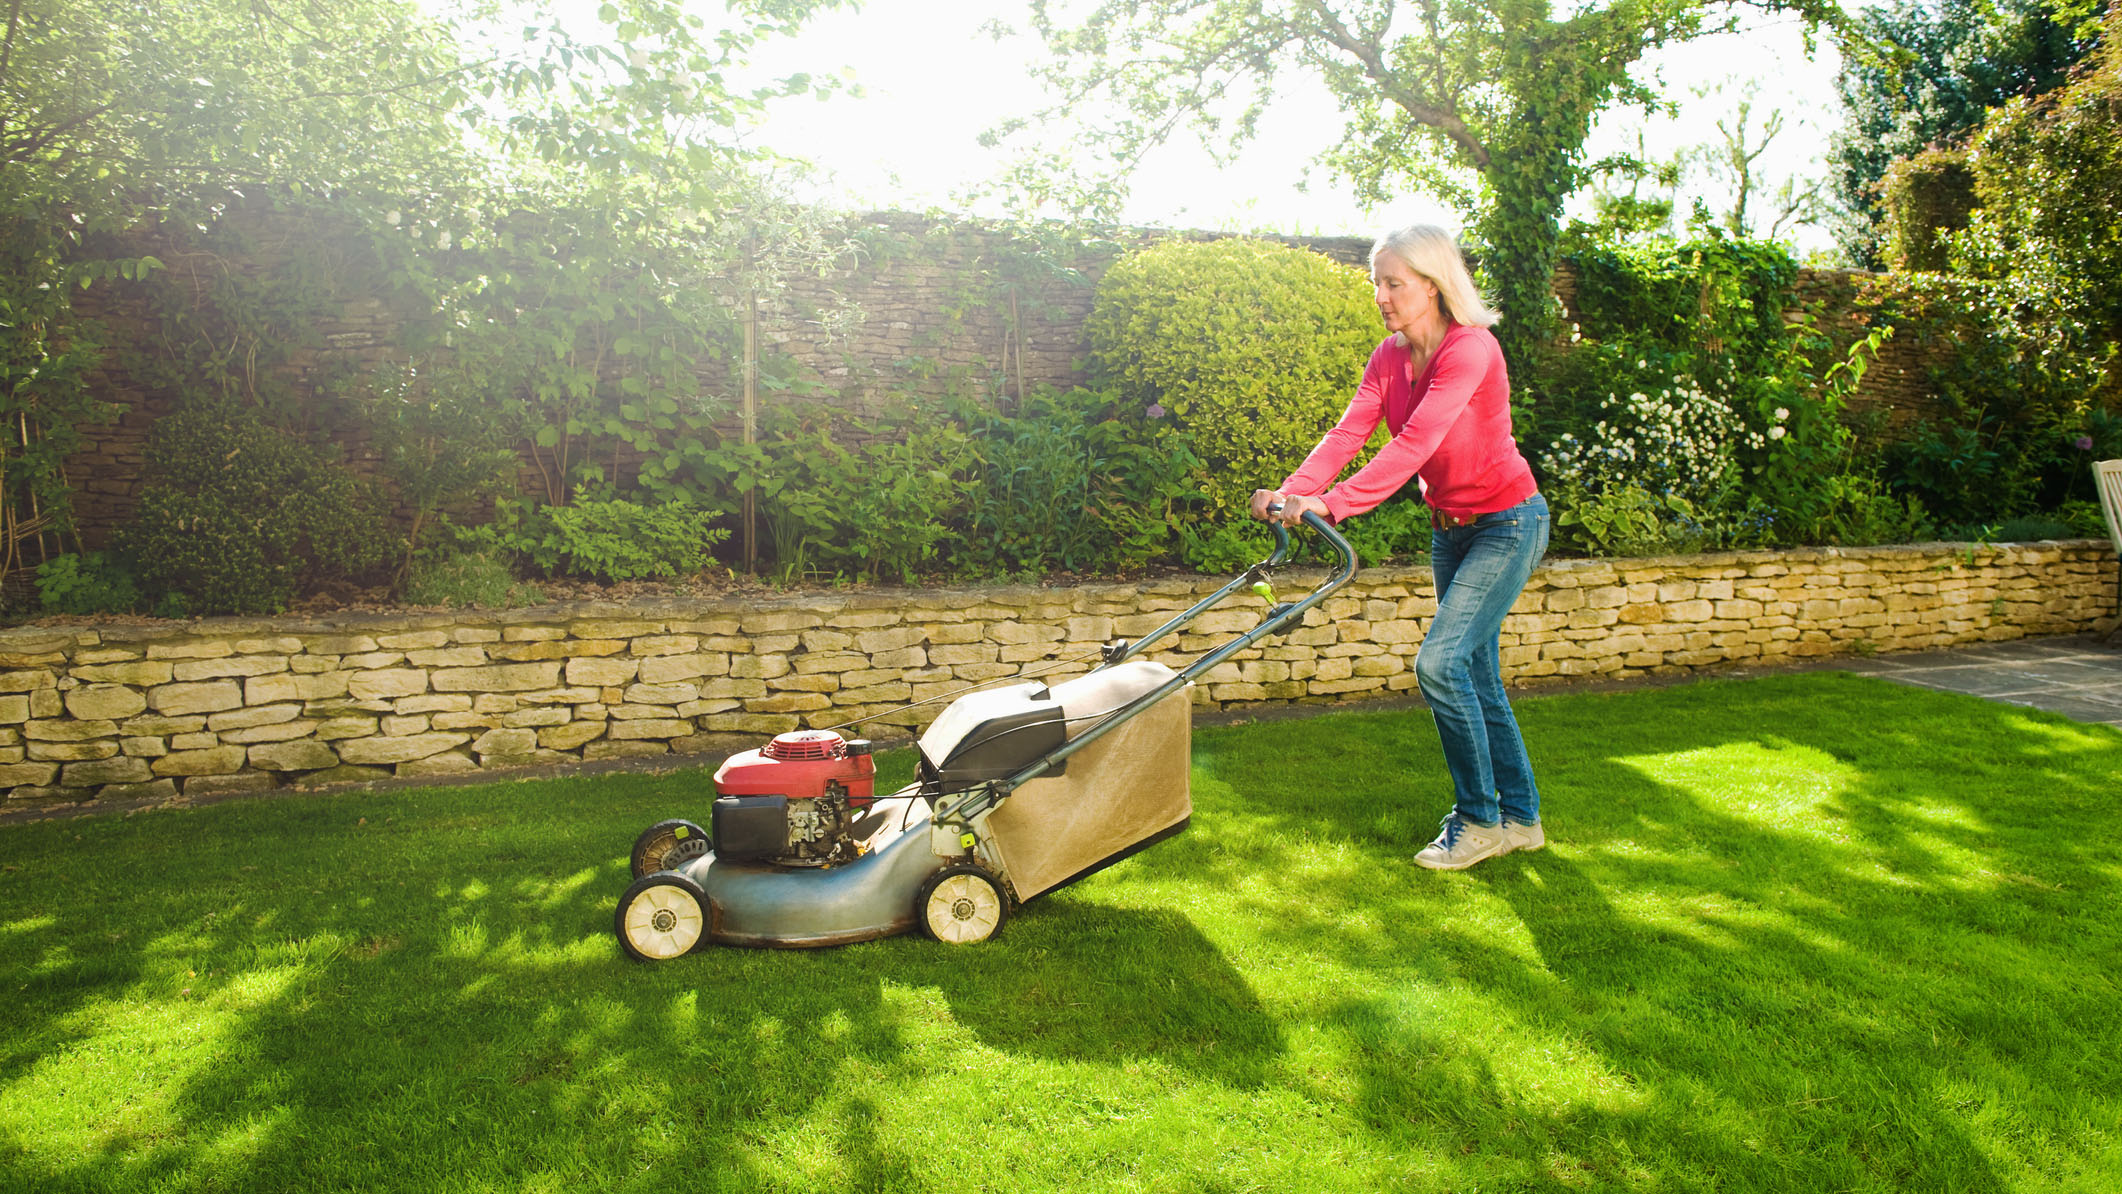 Best gas lawn mowers: A woman wearing a red top uses a lawn mower to cut the grass on a sunny day